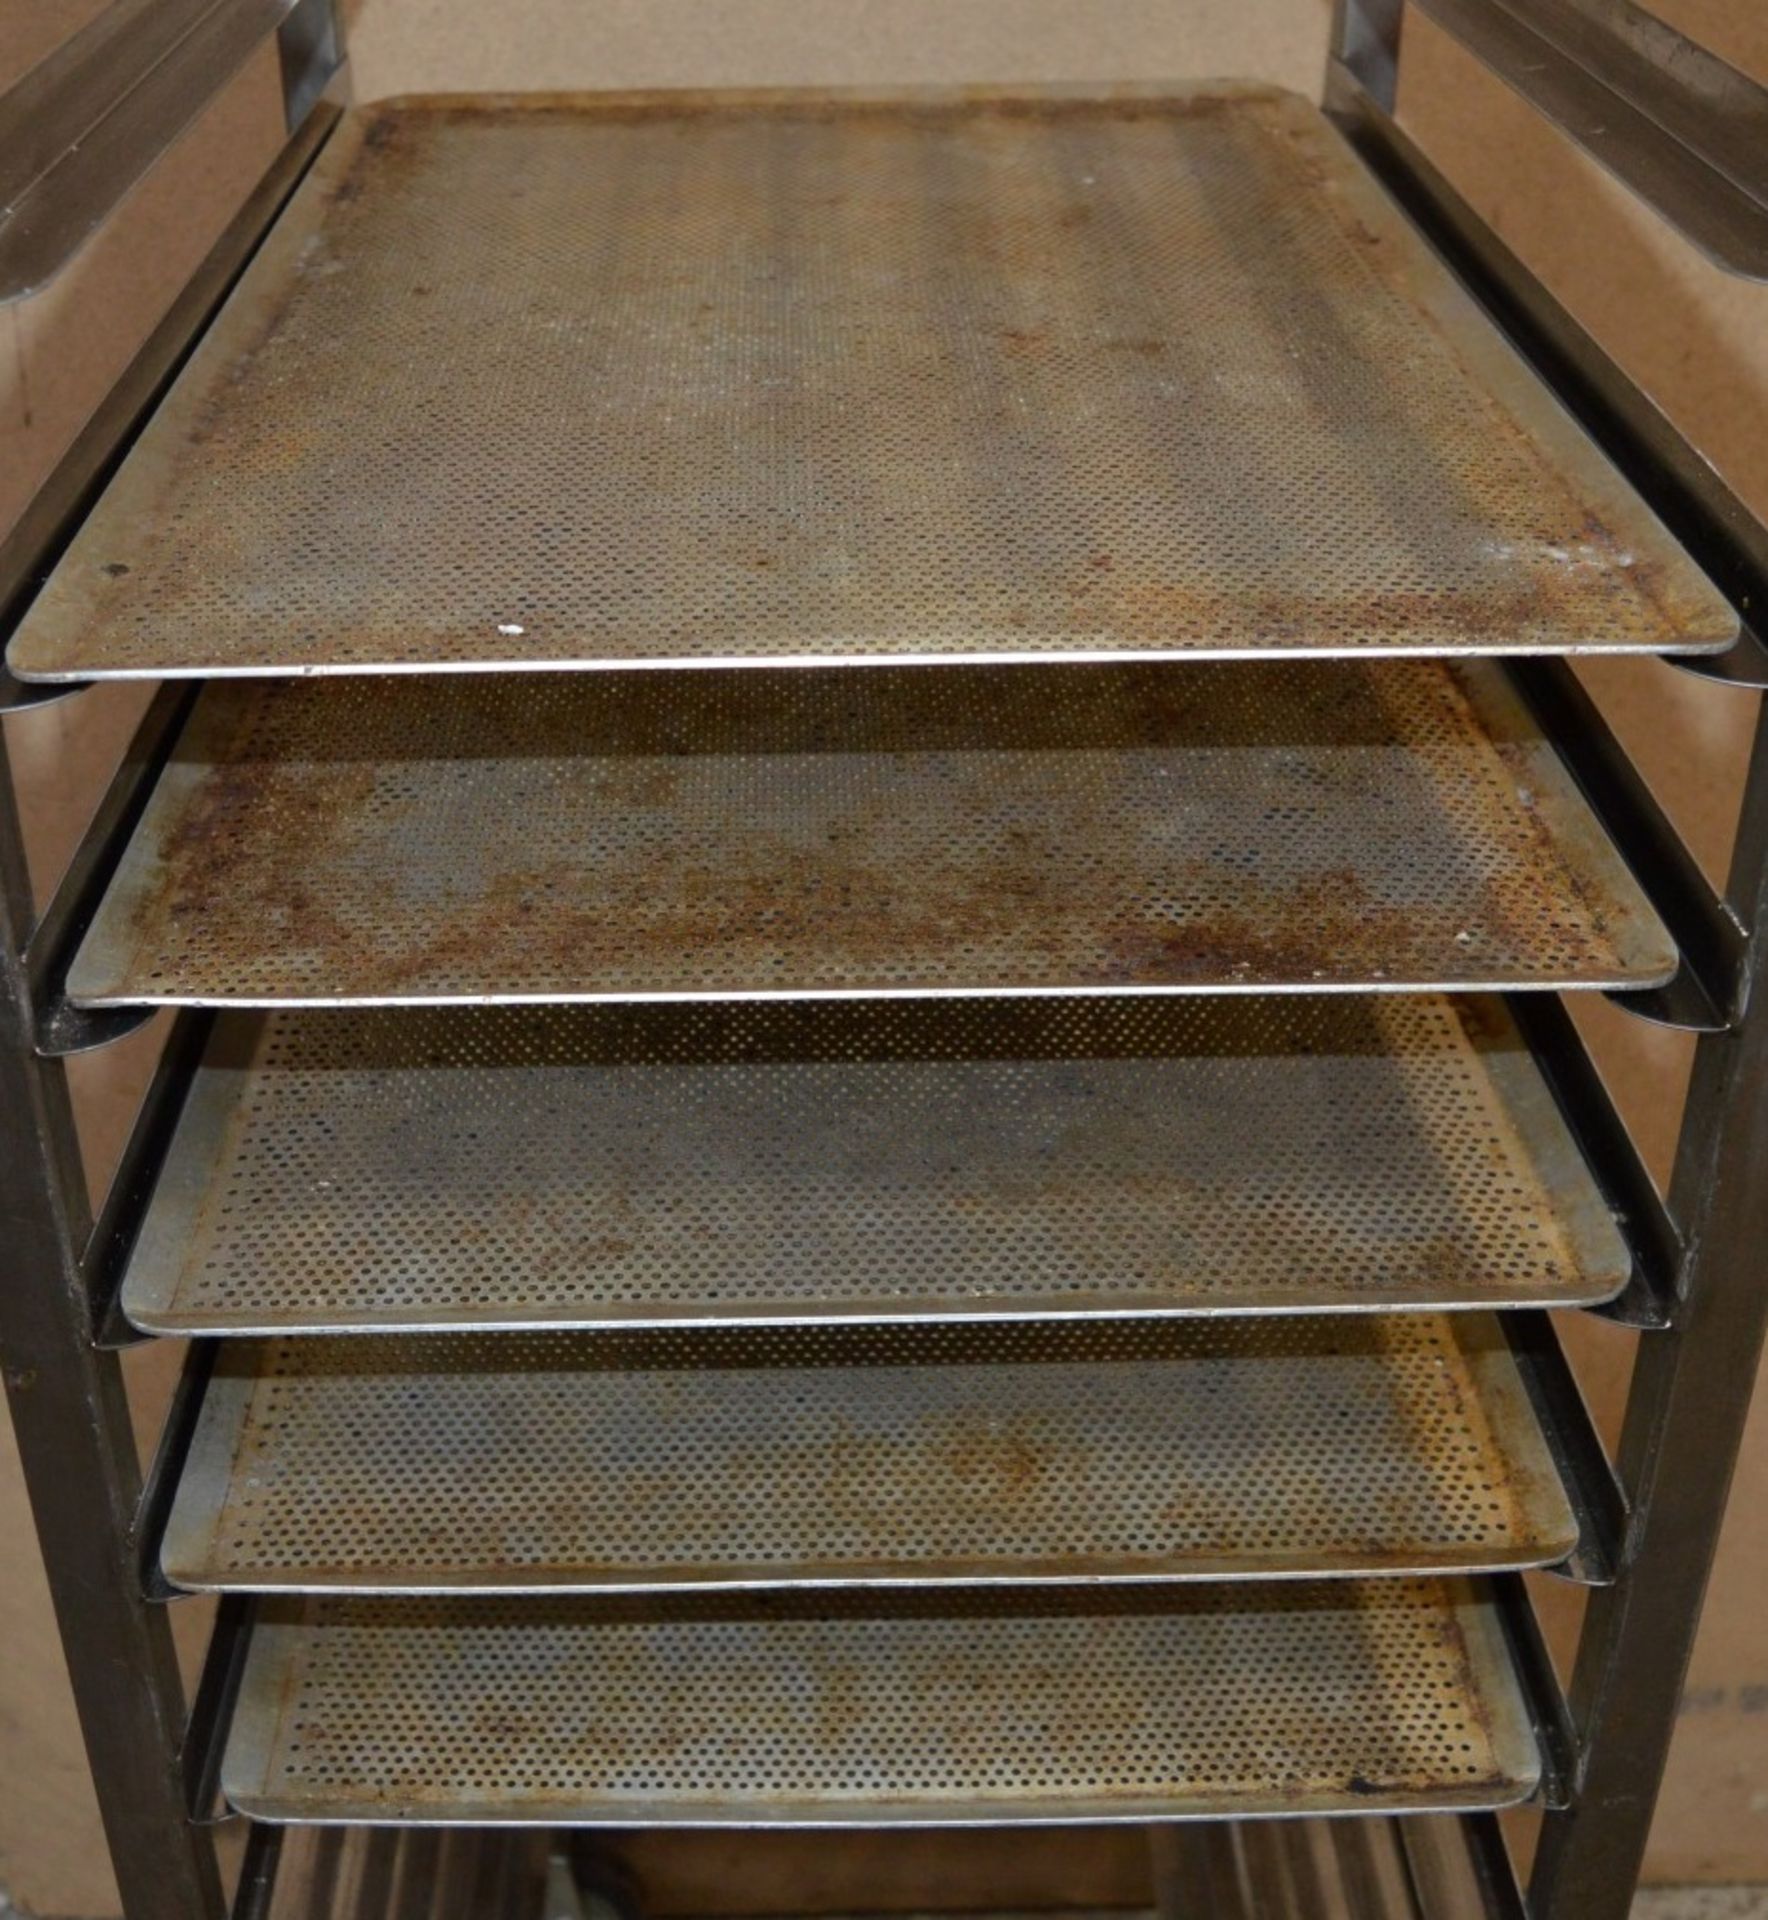 1 x Stainless Steel 18 Tier Pan and Tray Rack With Five Perforated Cooking Trays - CL282 - H183 x - Image 3 of 6